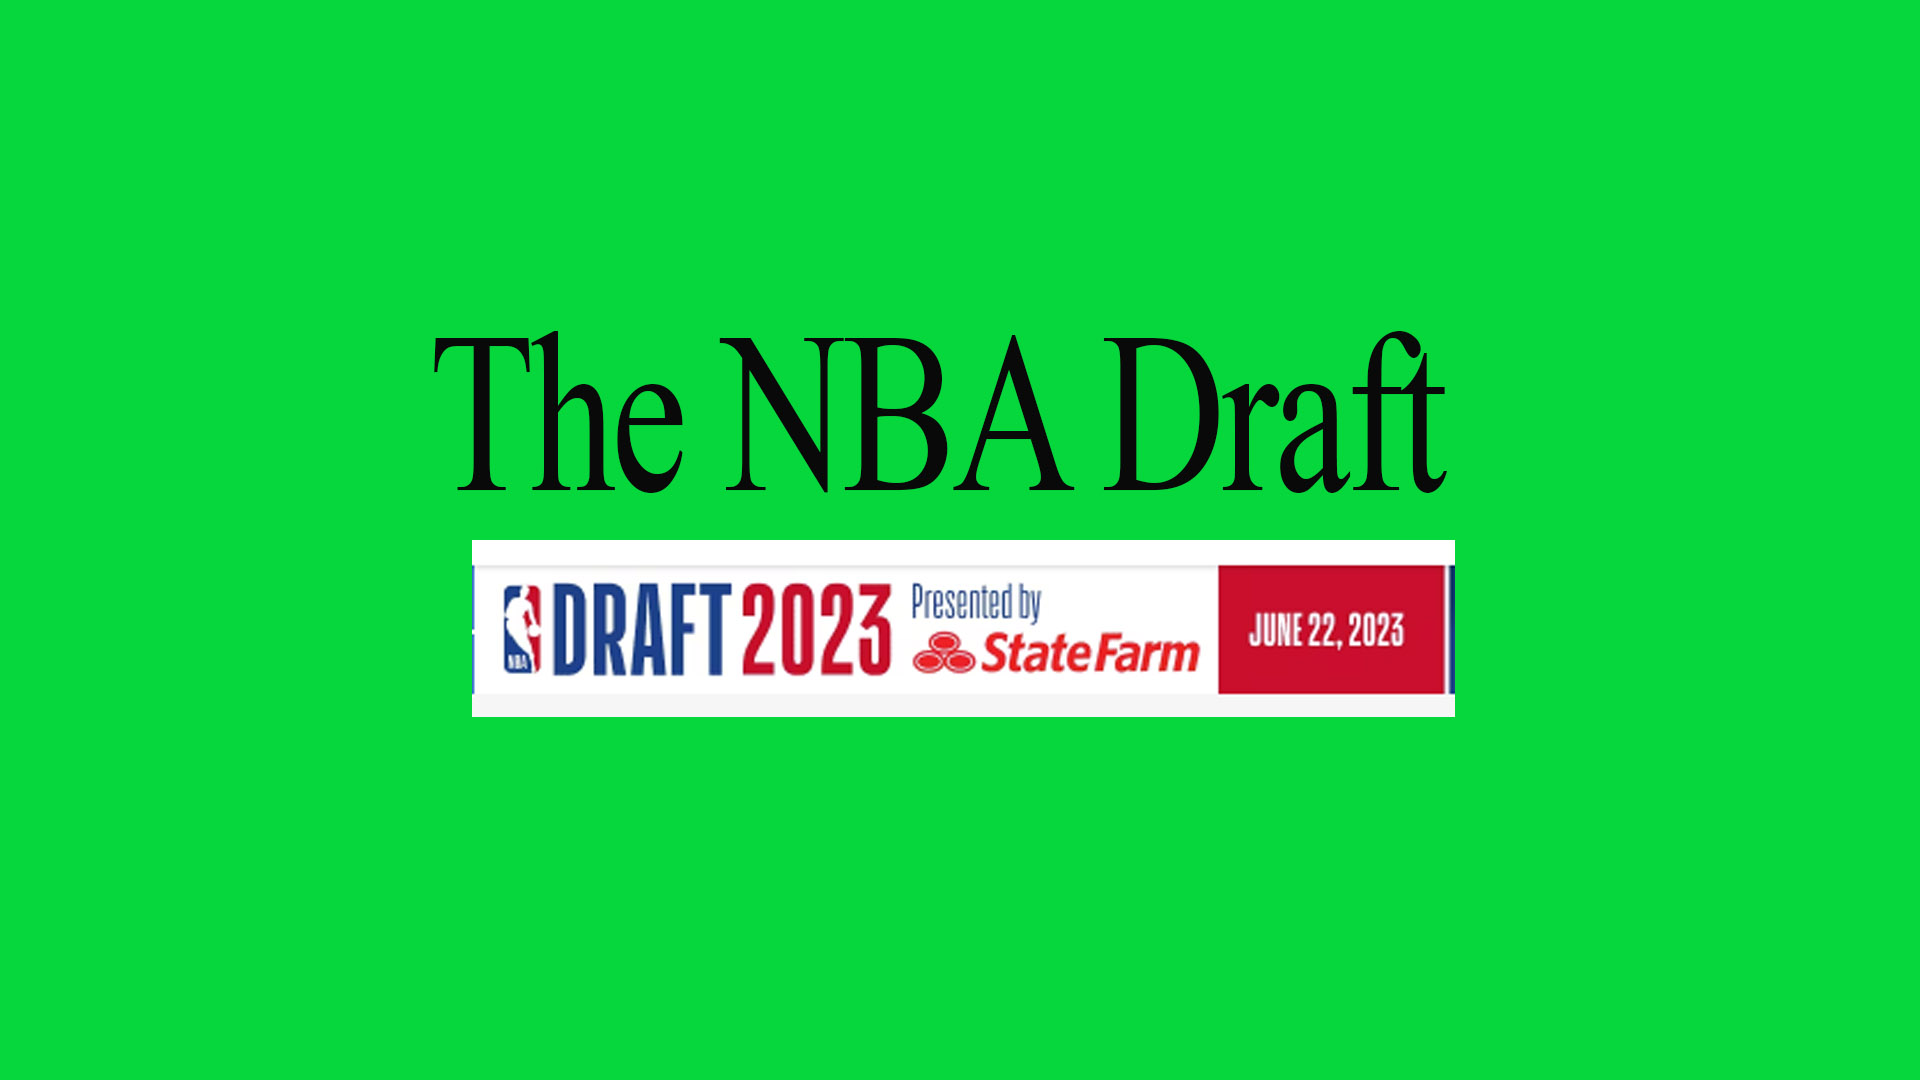 What Is The Nba Draft